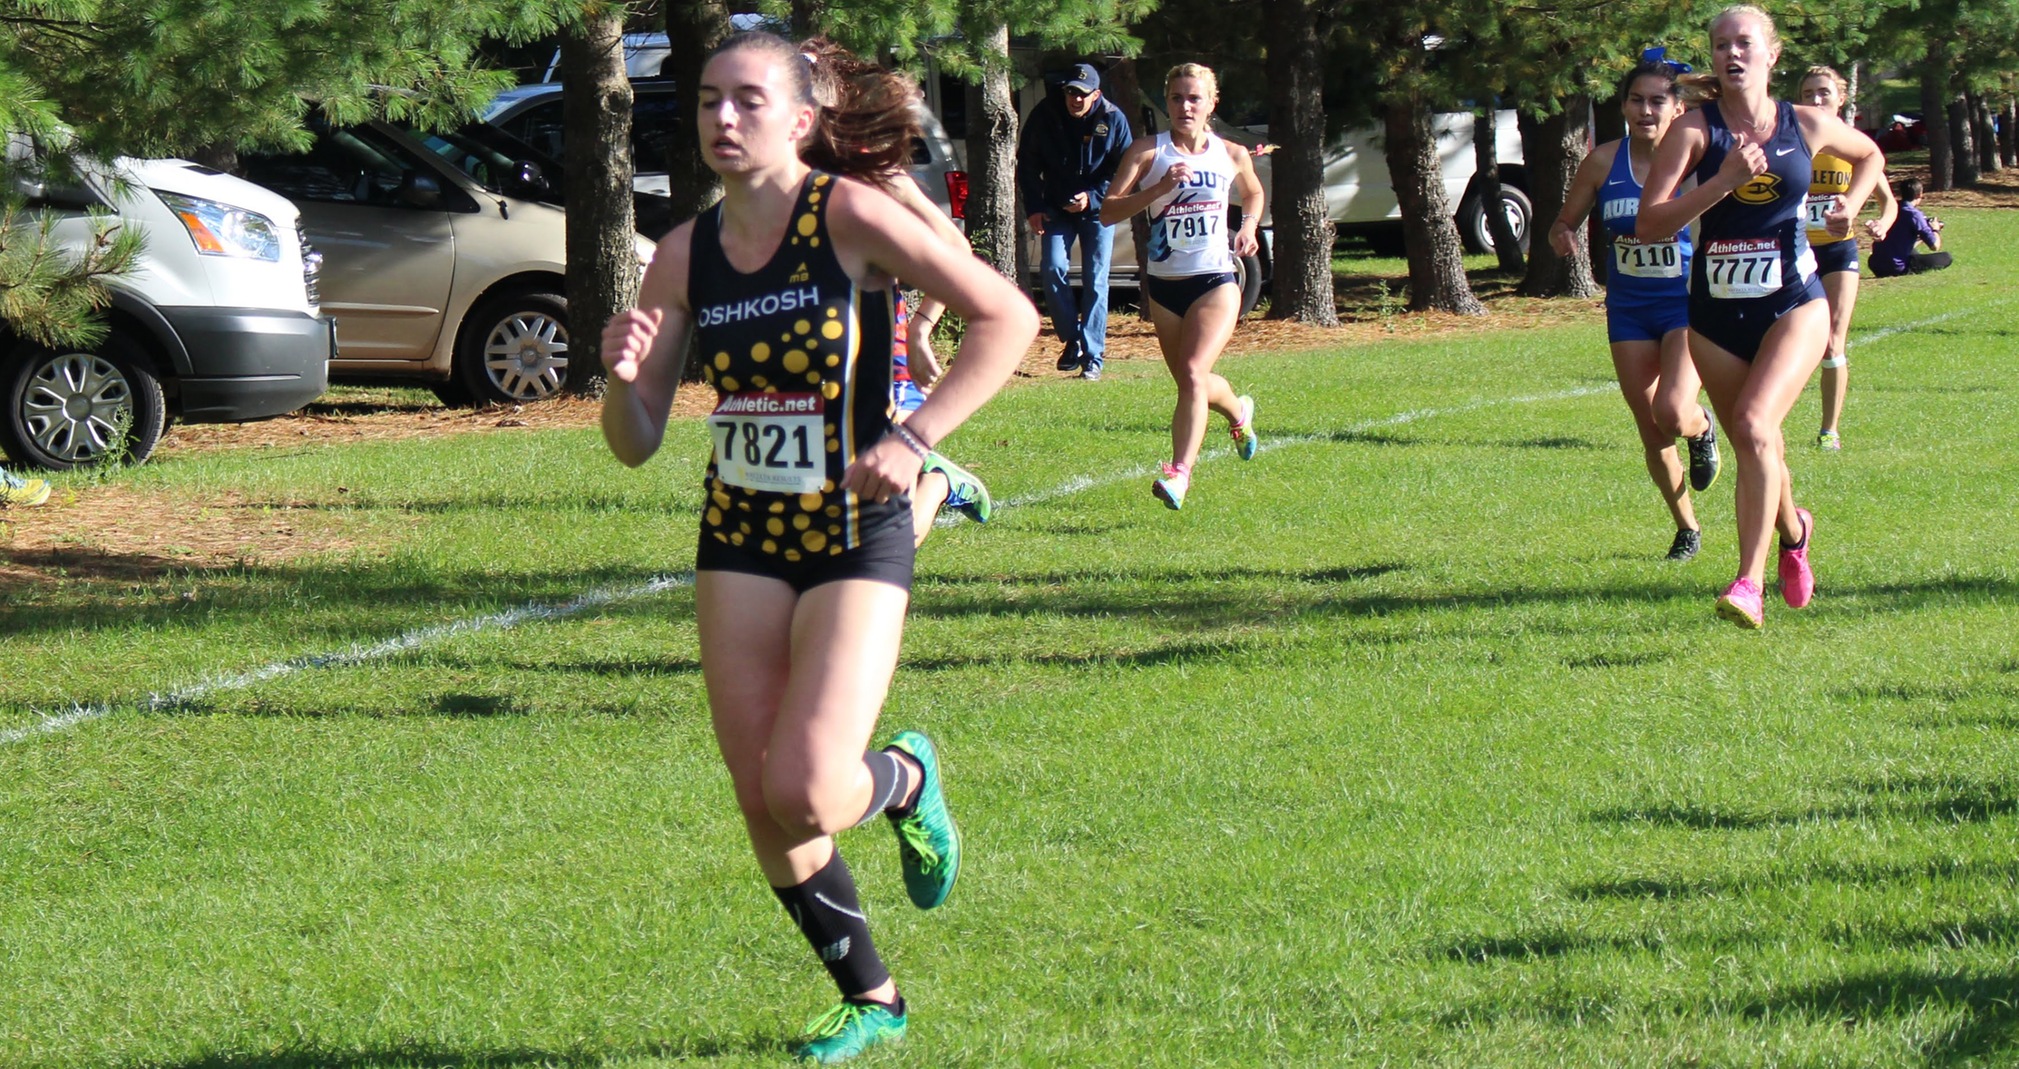 Hannah Lohrenz finished 78th among the 353 runners in the Pre-National race.